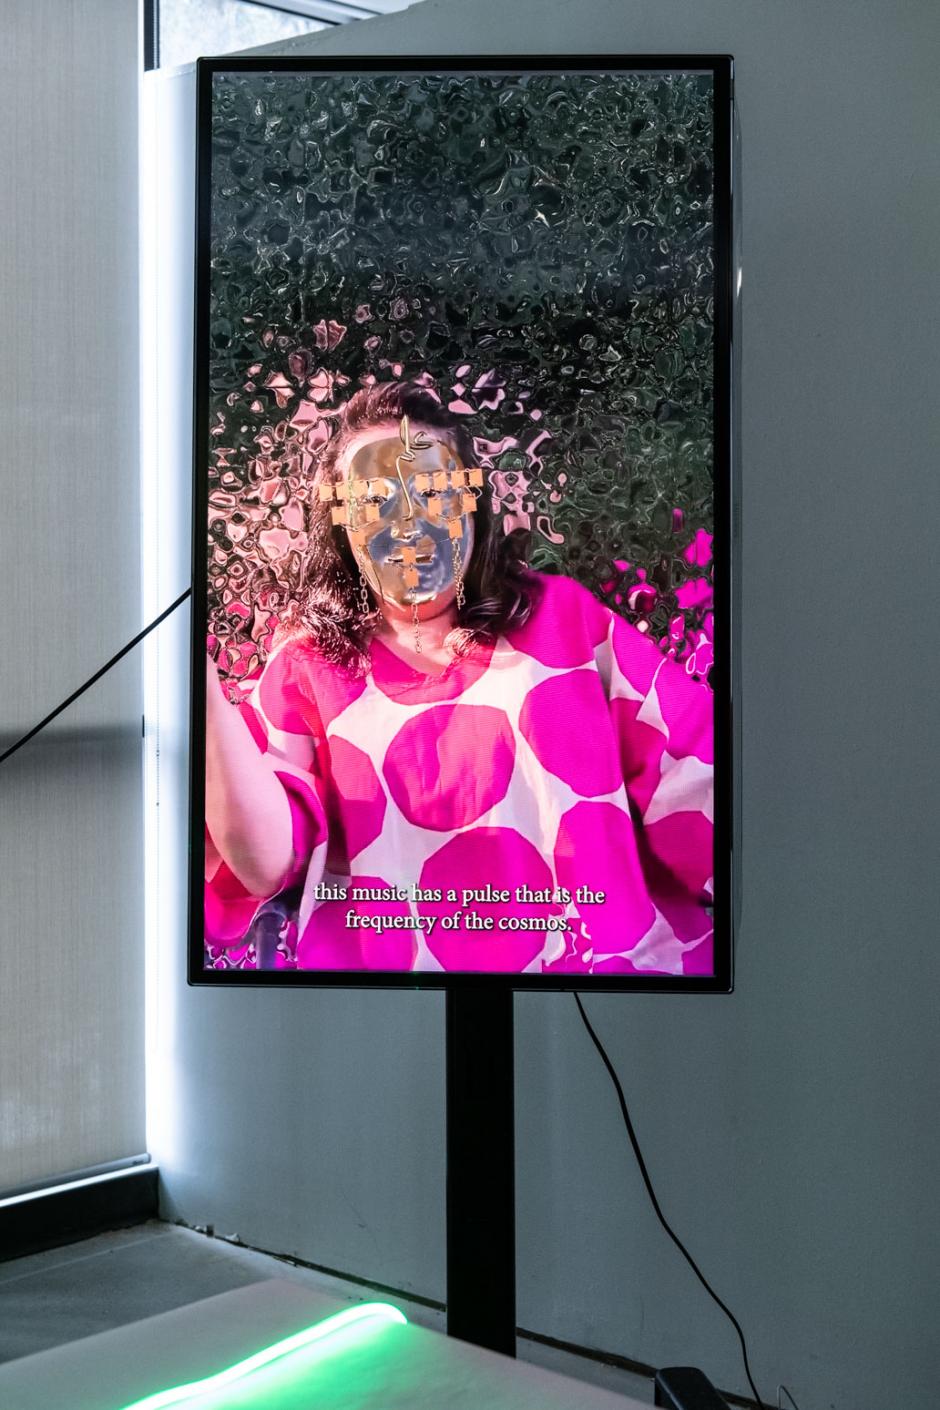 Digital artwork by Shirin exhibited on a vertical screen 